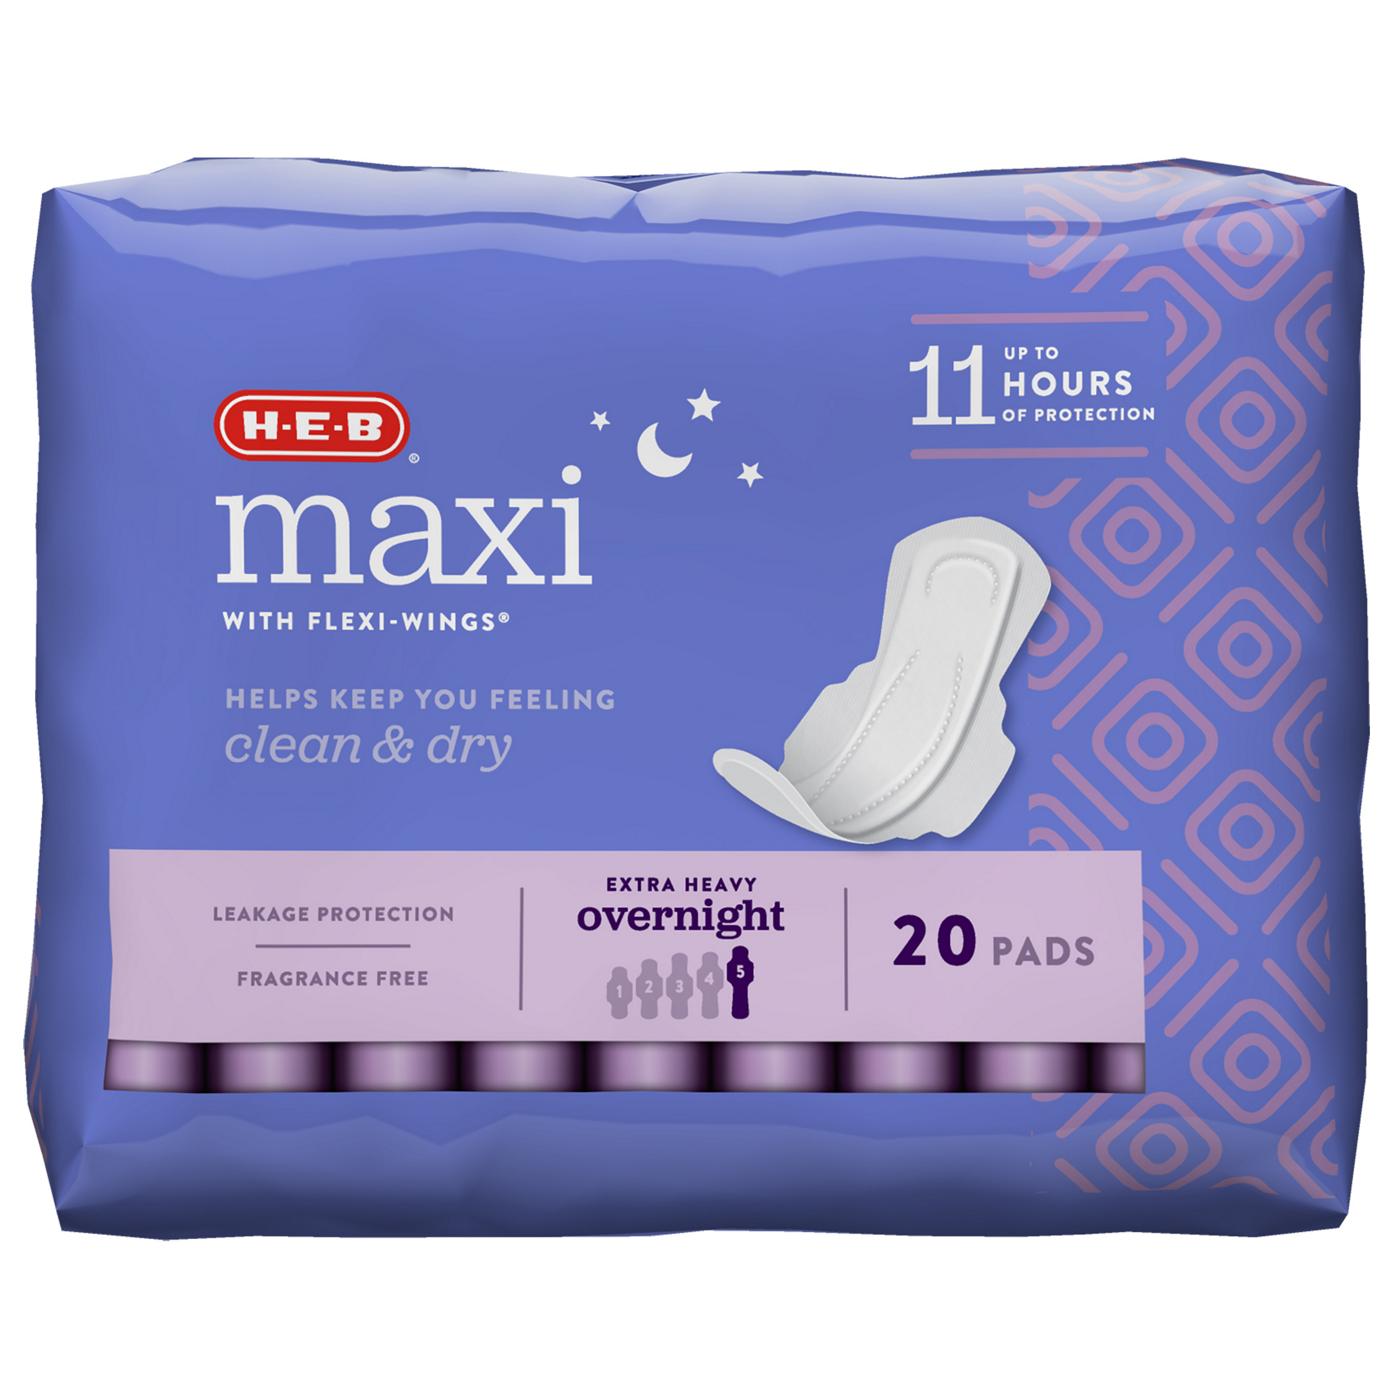 H-E-B Maxi with Flexi-Wings Overnight Pads - Extra Heavy; image 1 of 6